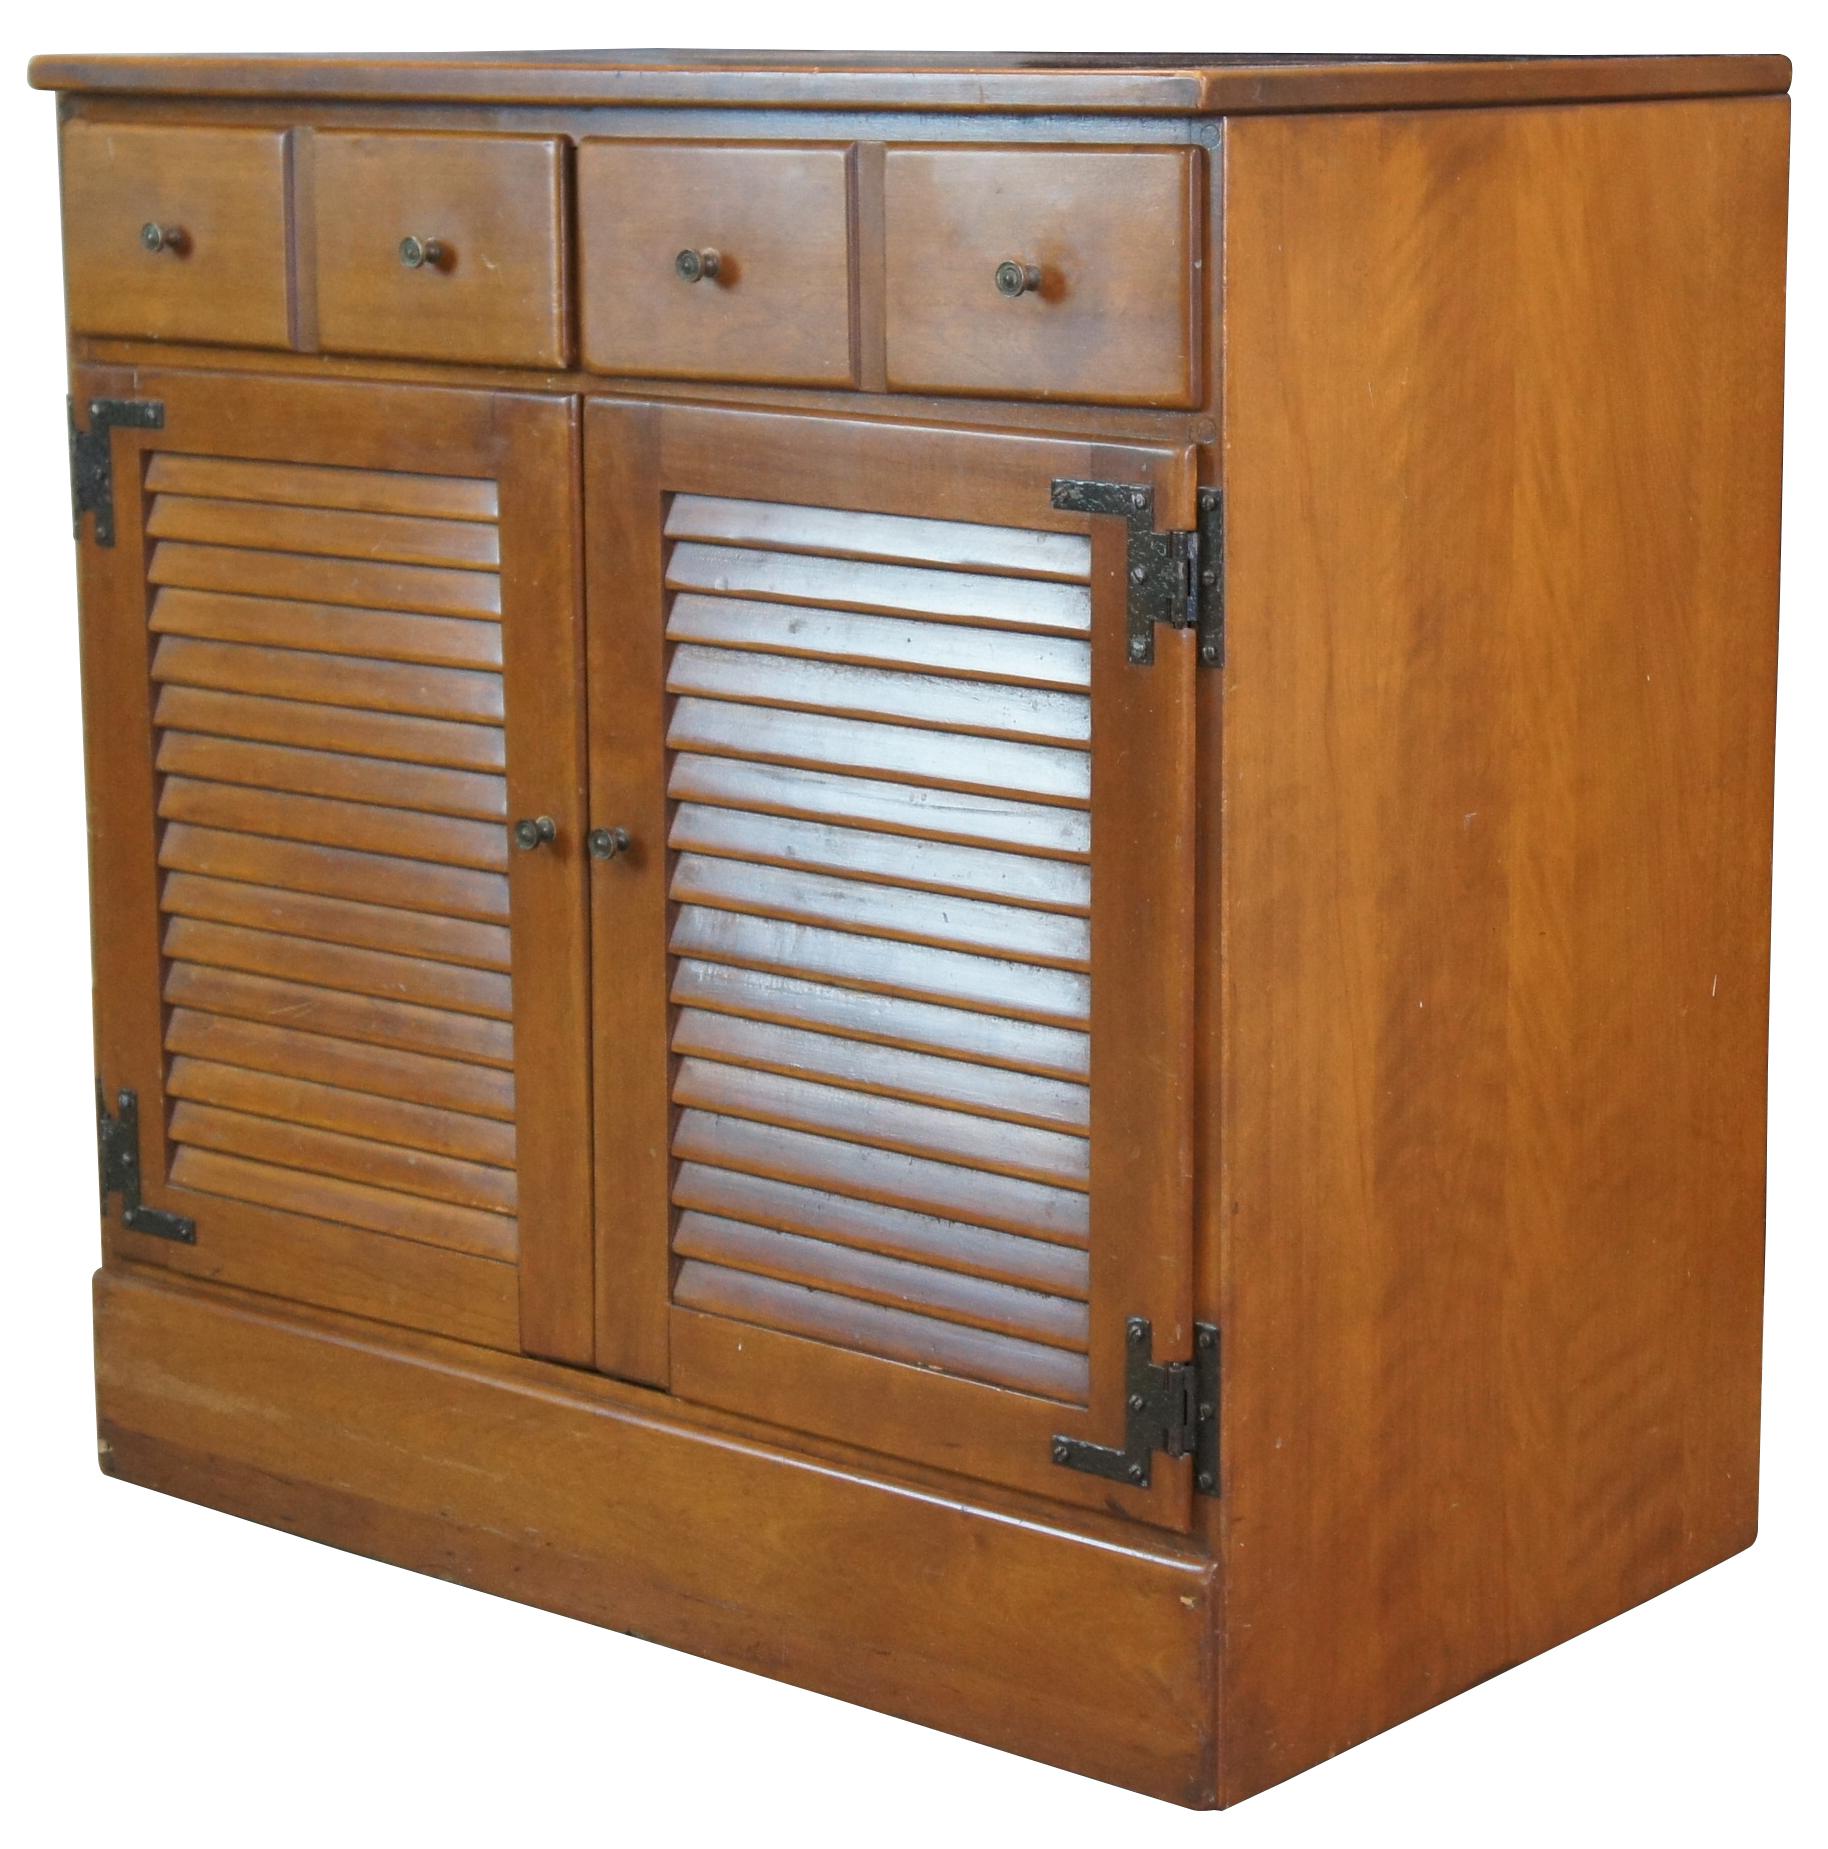 Mid century Baumbritter Ethan Allen Heirloom shutter door cabinet, side table, or console. Made of maple featuring rectangular form with lower cabinet and upper drawers. Circa 1954. Nutmeg Finish. Measure: 30